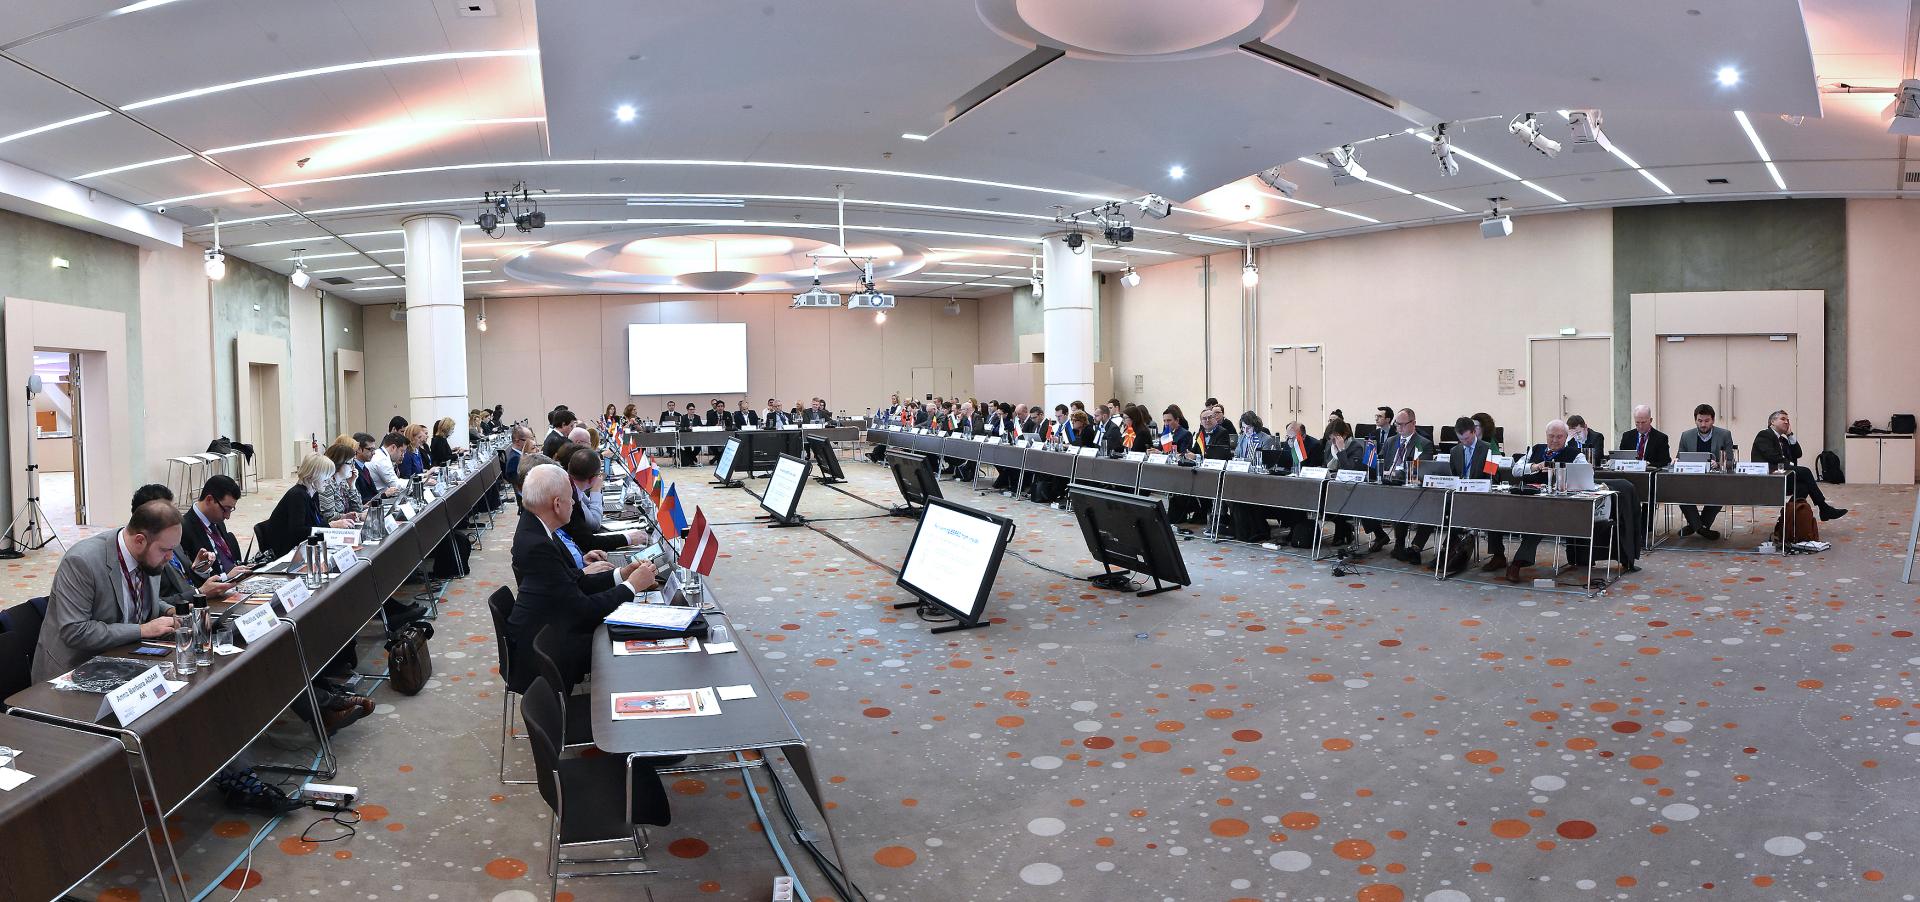 The image shows a meeting hall with multiple participants sitting at a U-shaped table group